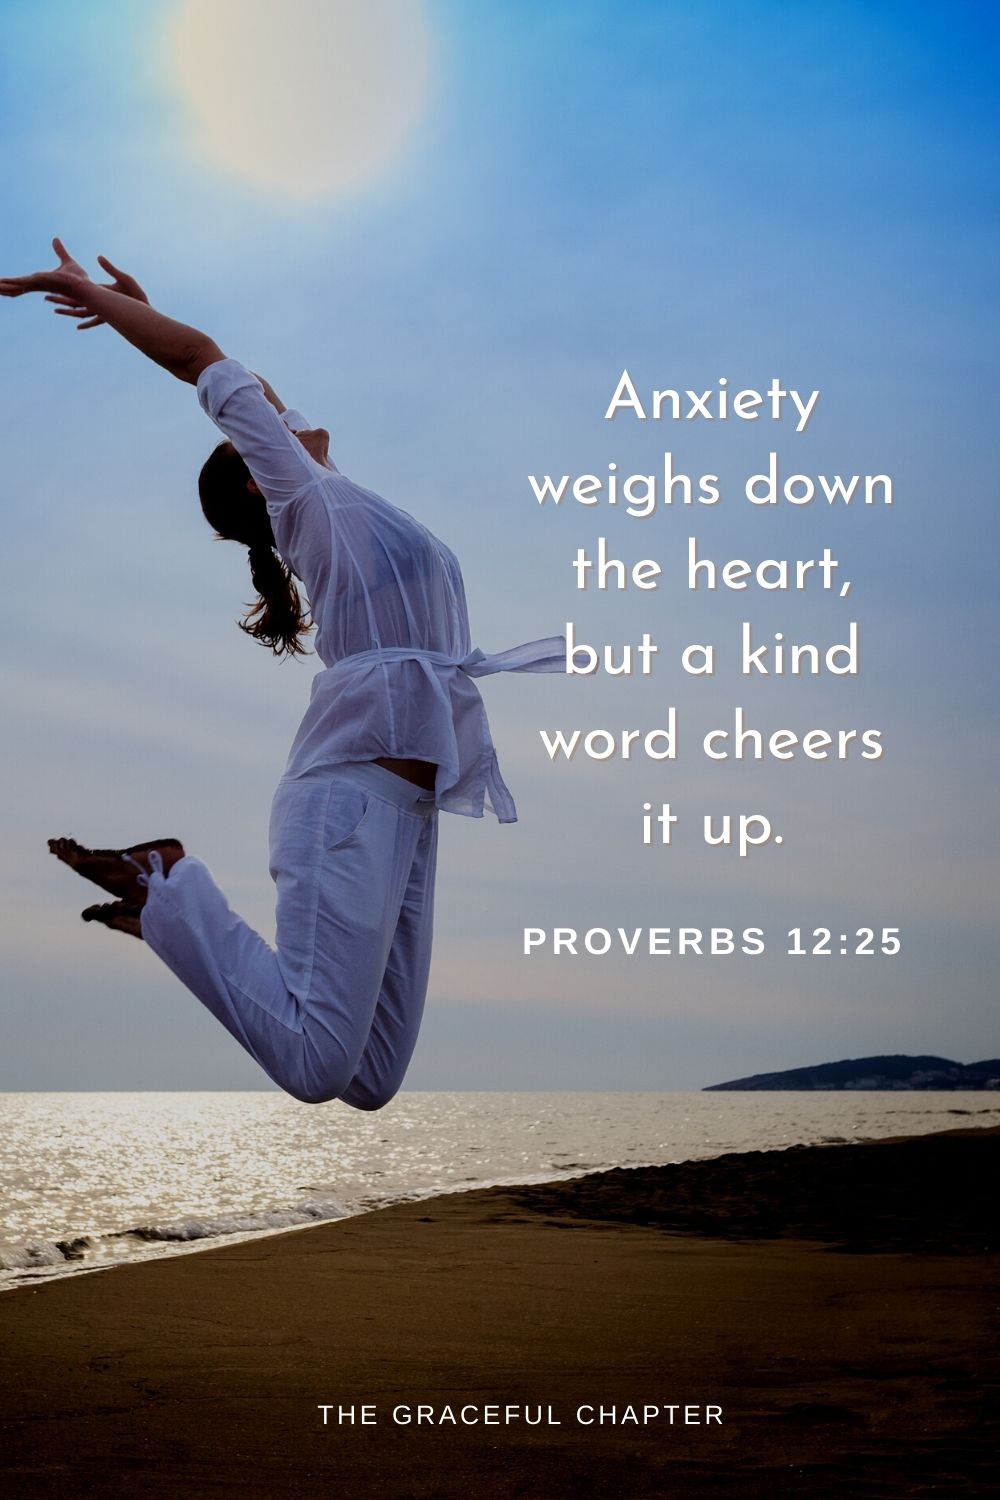 Anxiety weighs down the heart, but a kind word cheers it up.